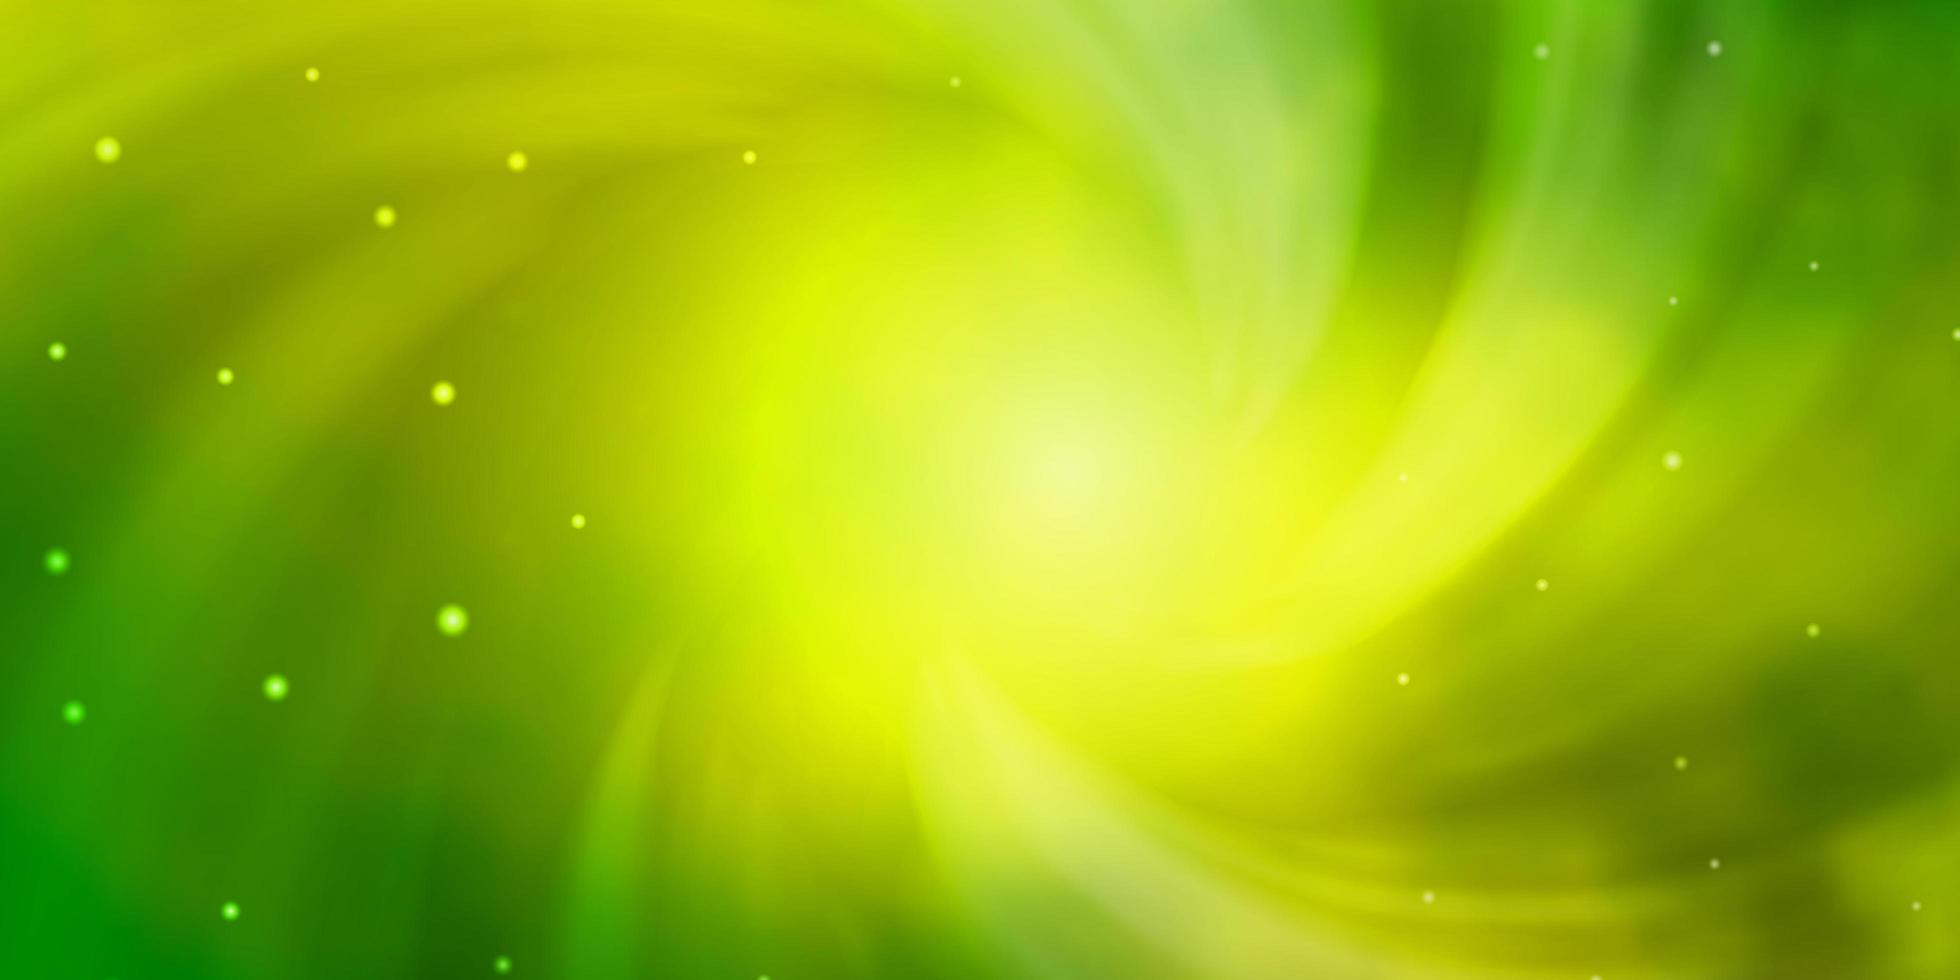 Light Green, Yellow vector background with colorful stars.